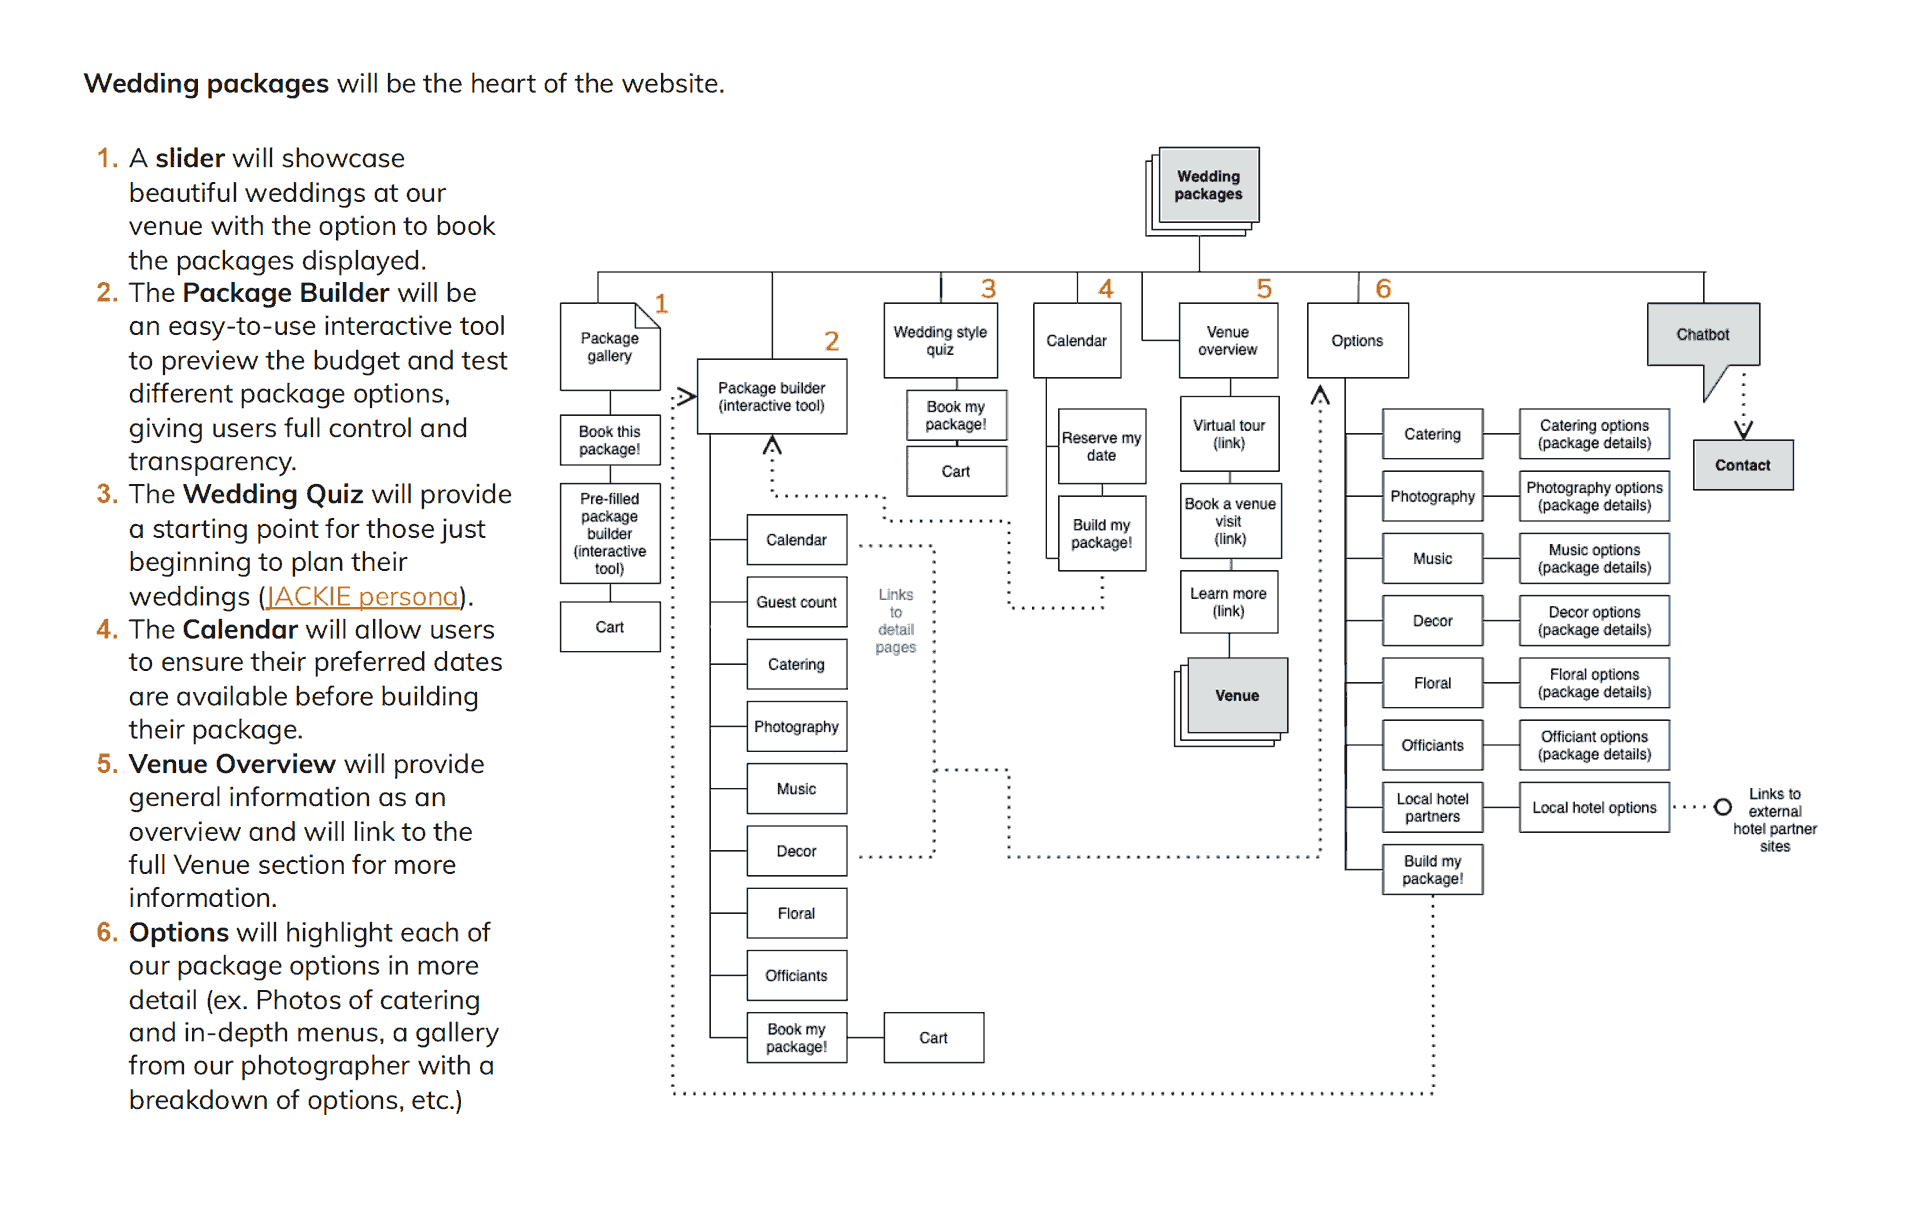 Annotated Site Plan of the Wedding Package Page